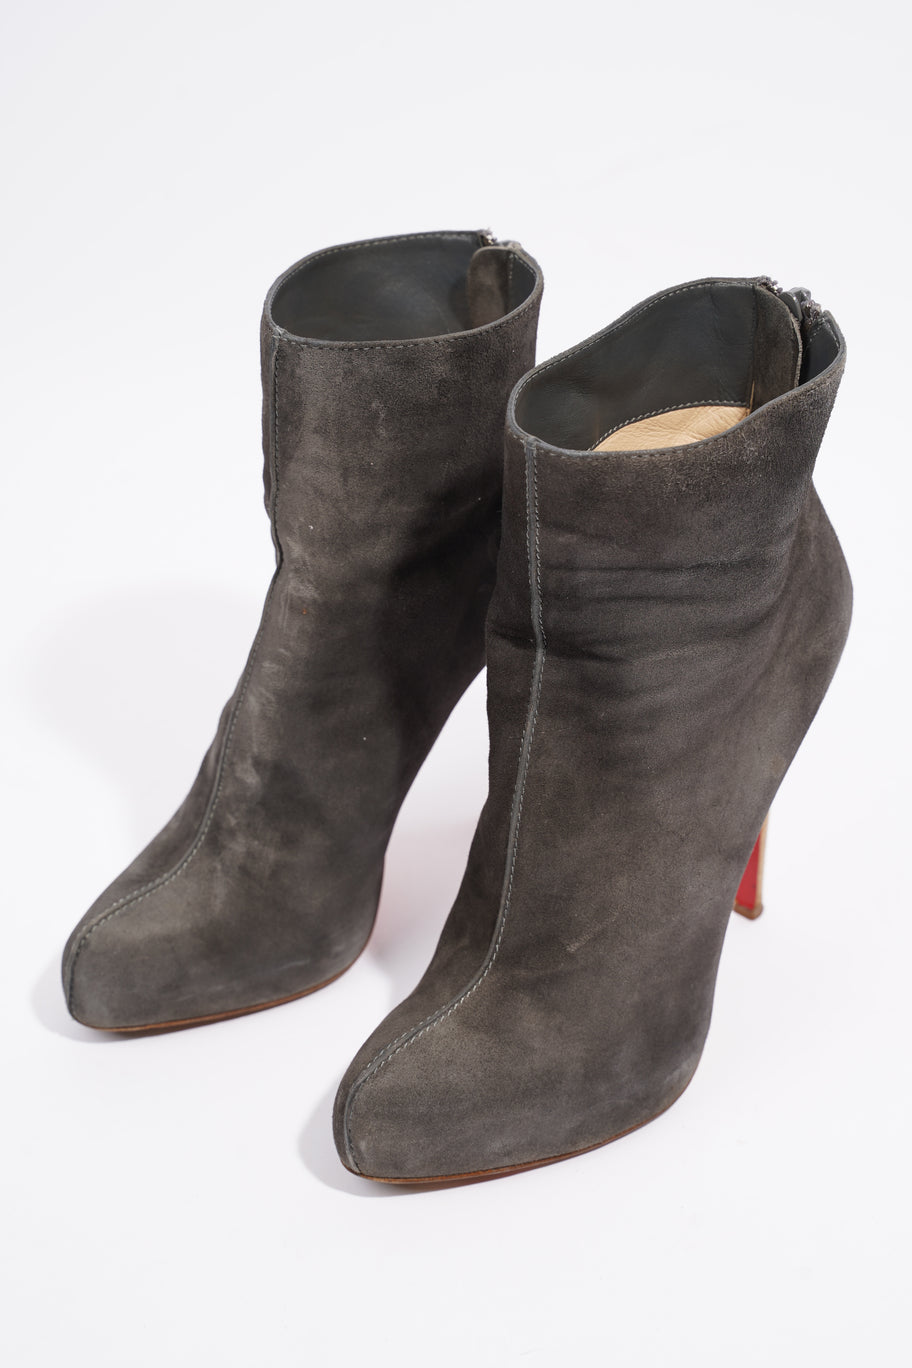 Ankle Boot Grey Suede EU 38 UK 5 Image 11